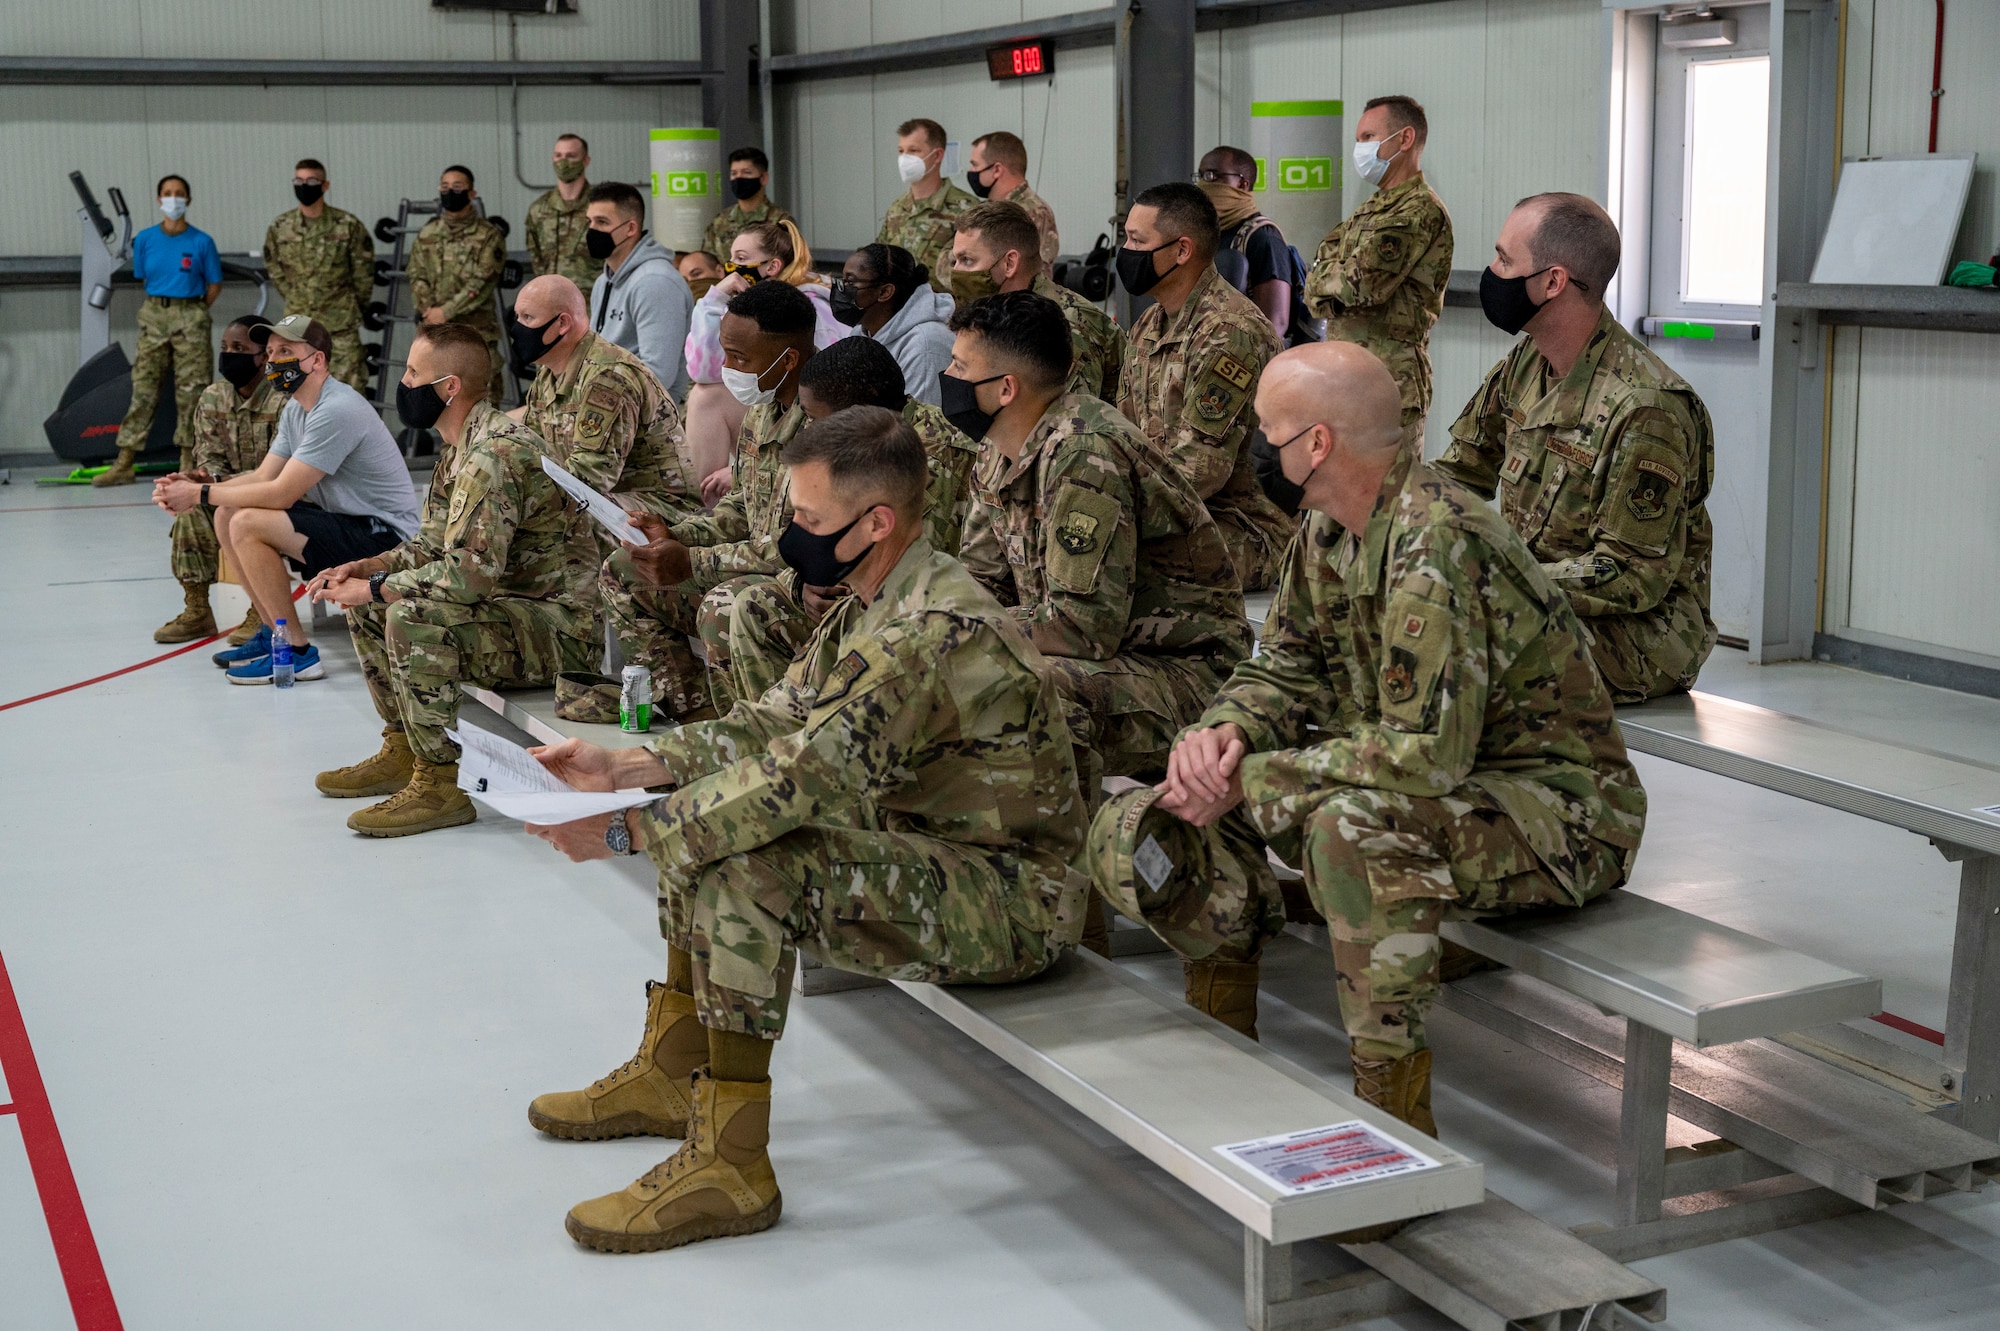 Members of the 380th Air Expeditionary Wing (AEW) receive a COVID-19 vaccine